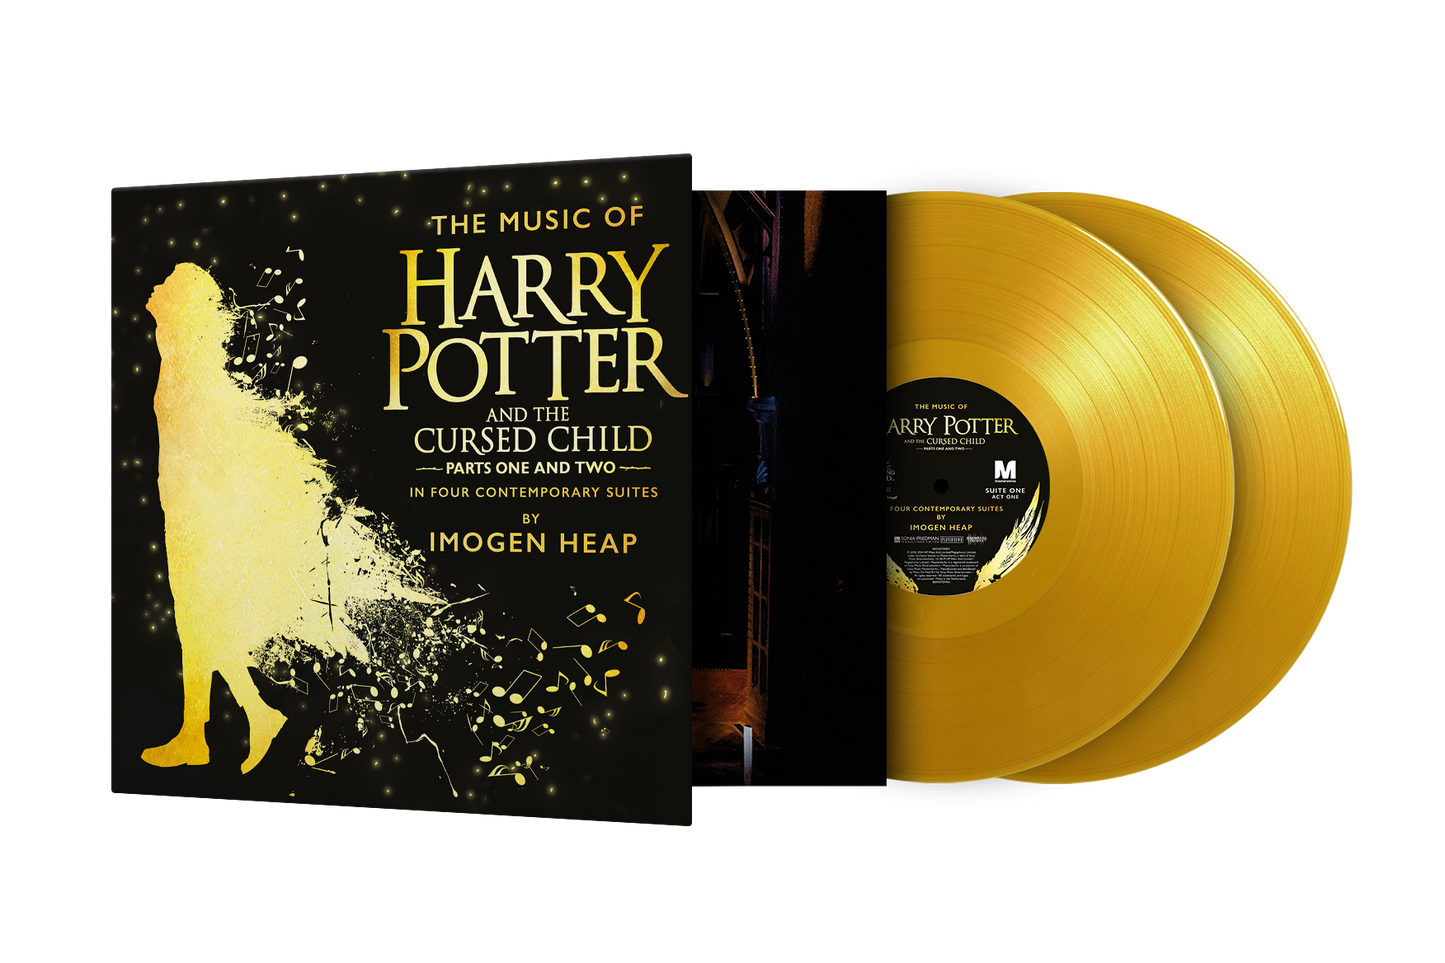 The Music Of Harry Potter And The Cursed Child: Parts One And Two